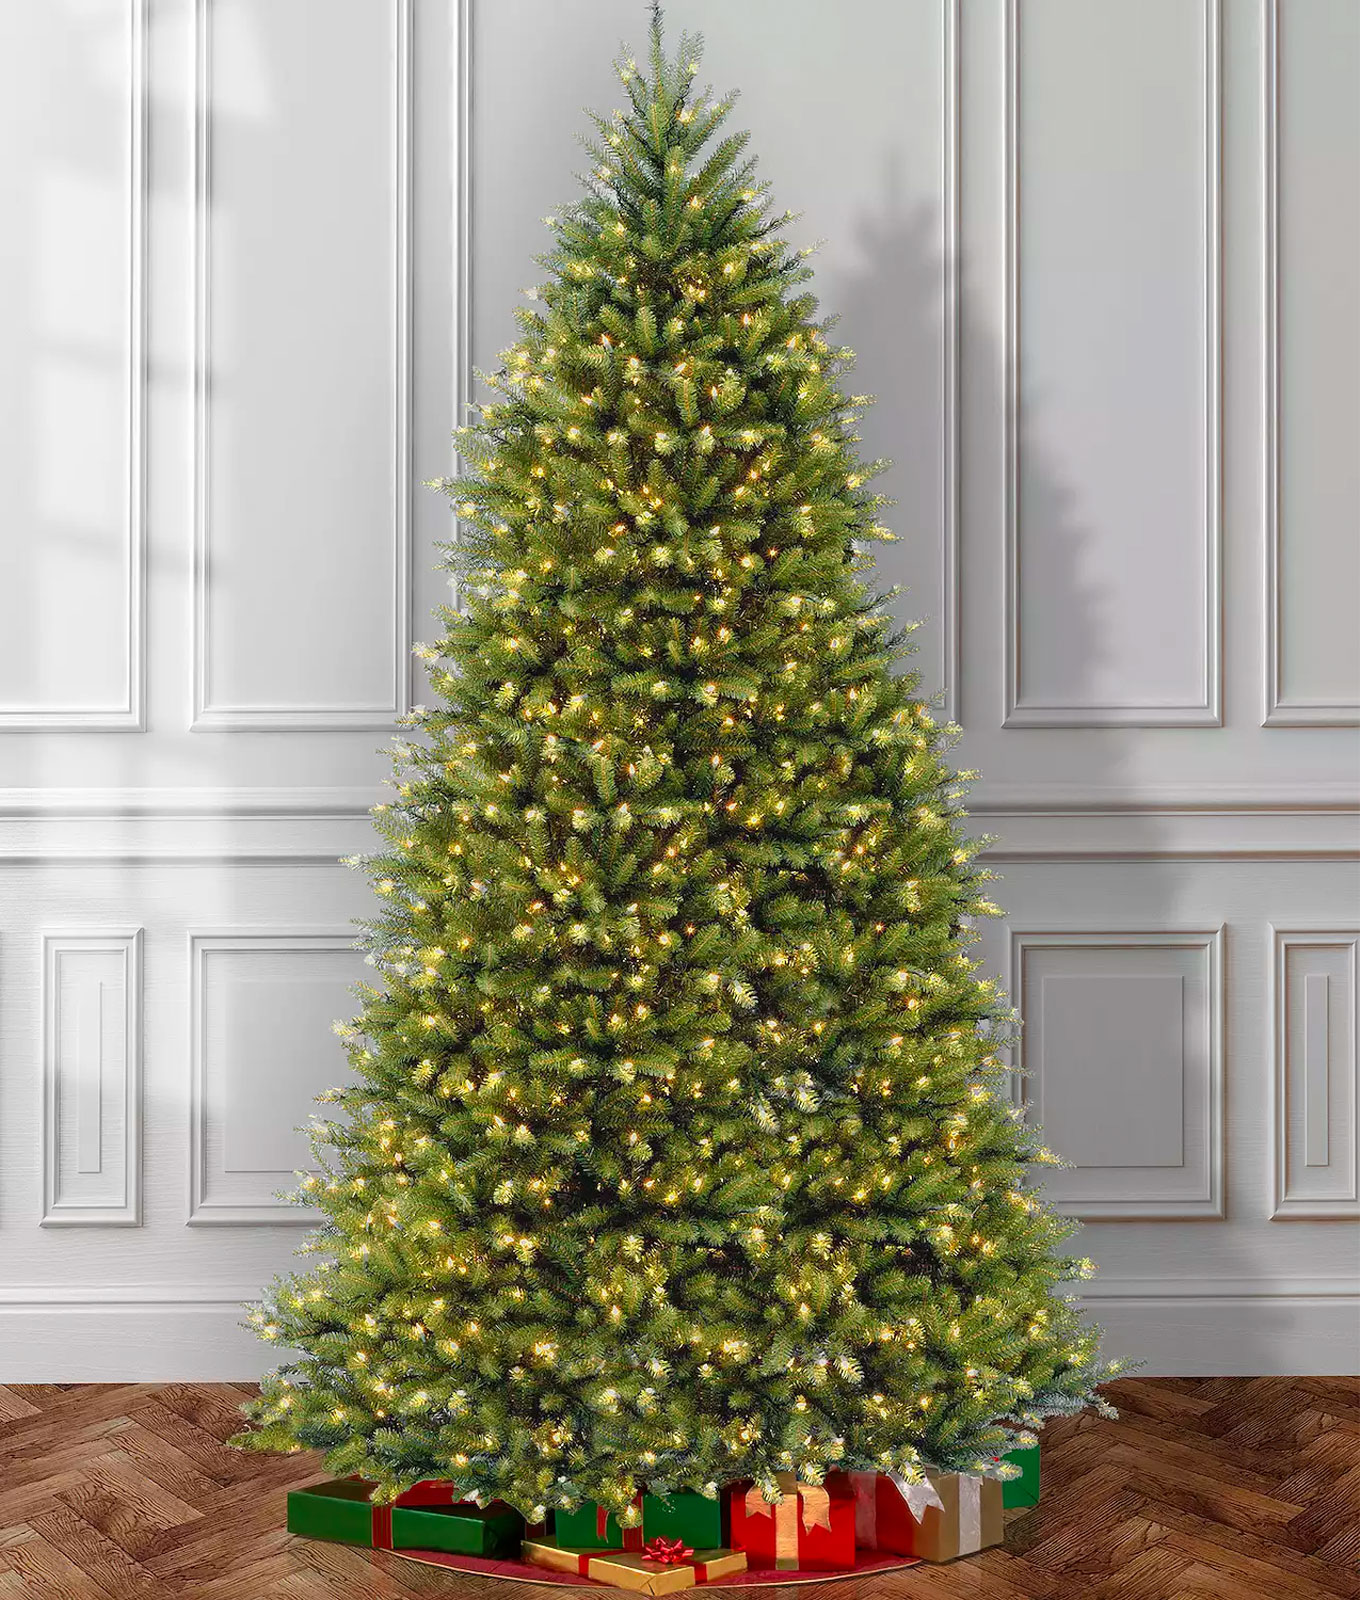 There's a Big Artificial Christmas Tree Sale Happening at Kohl's for